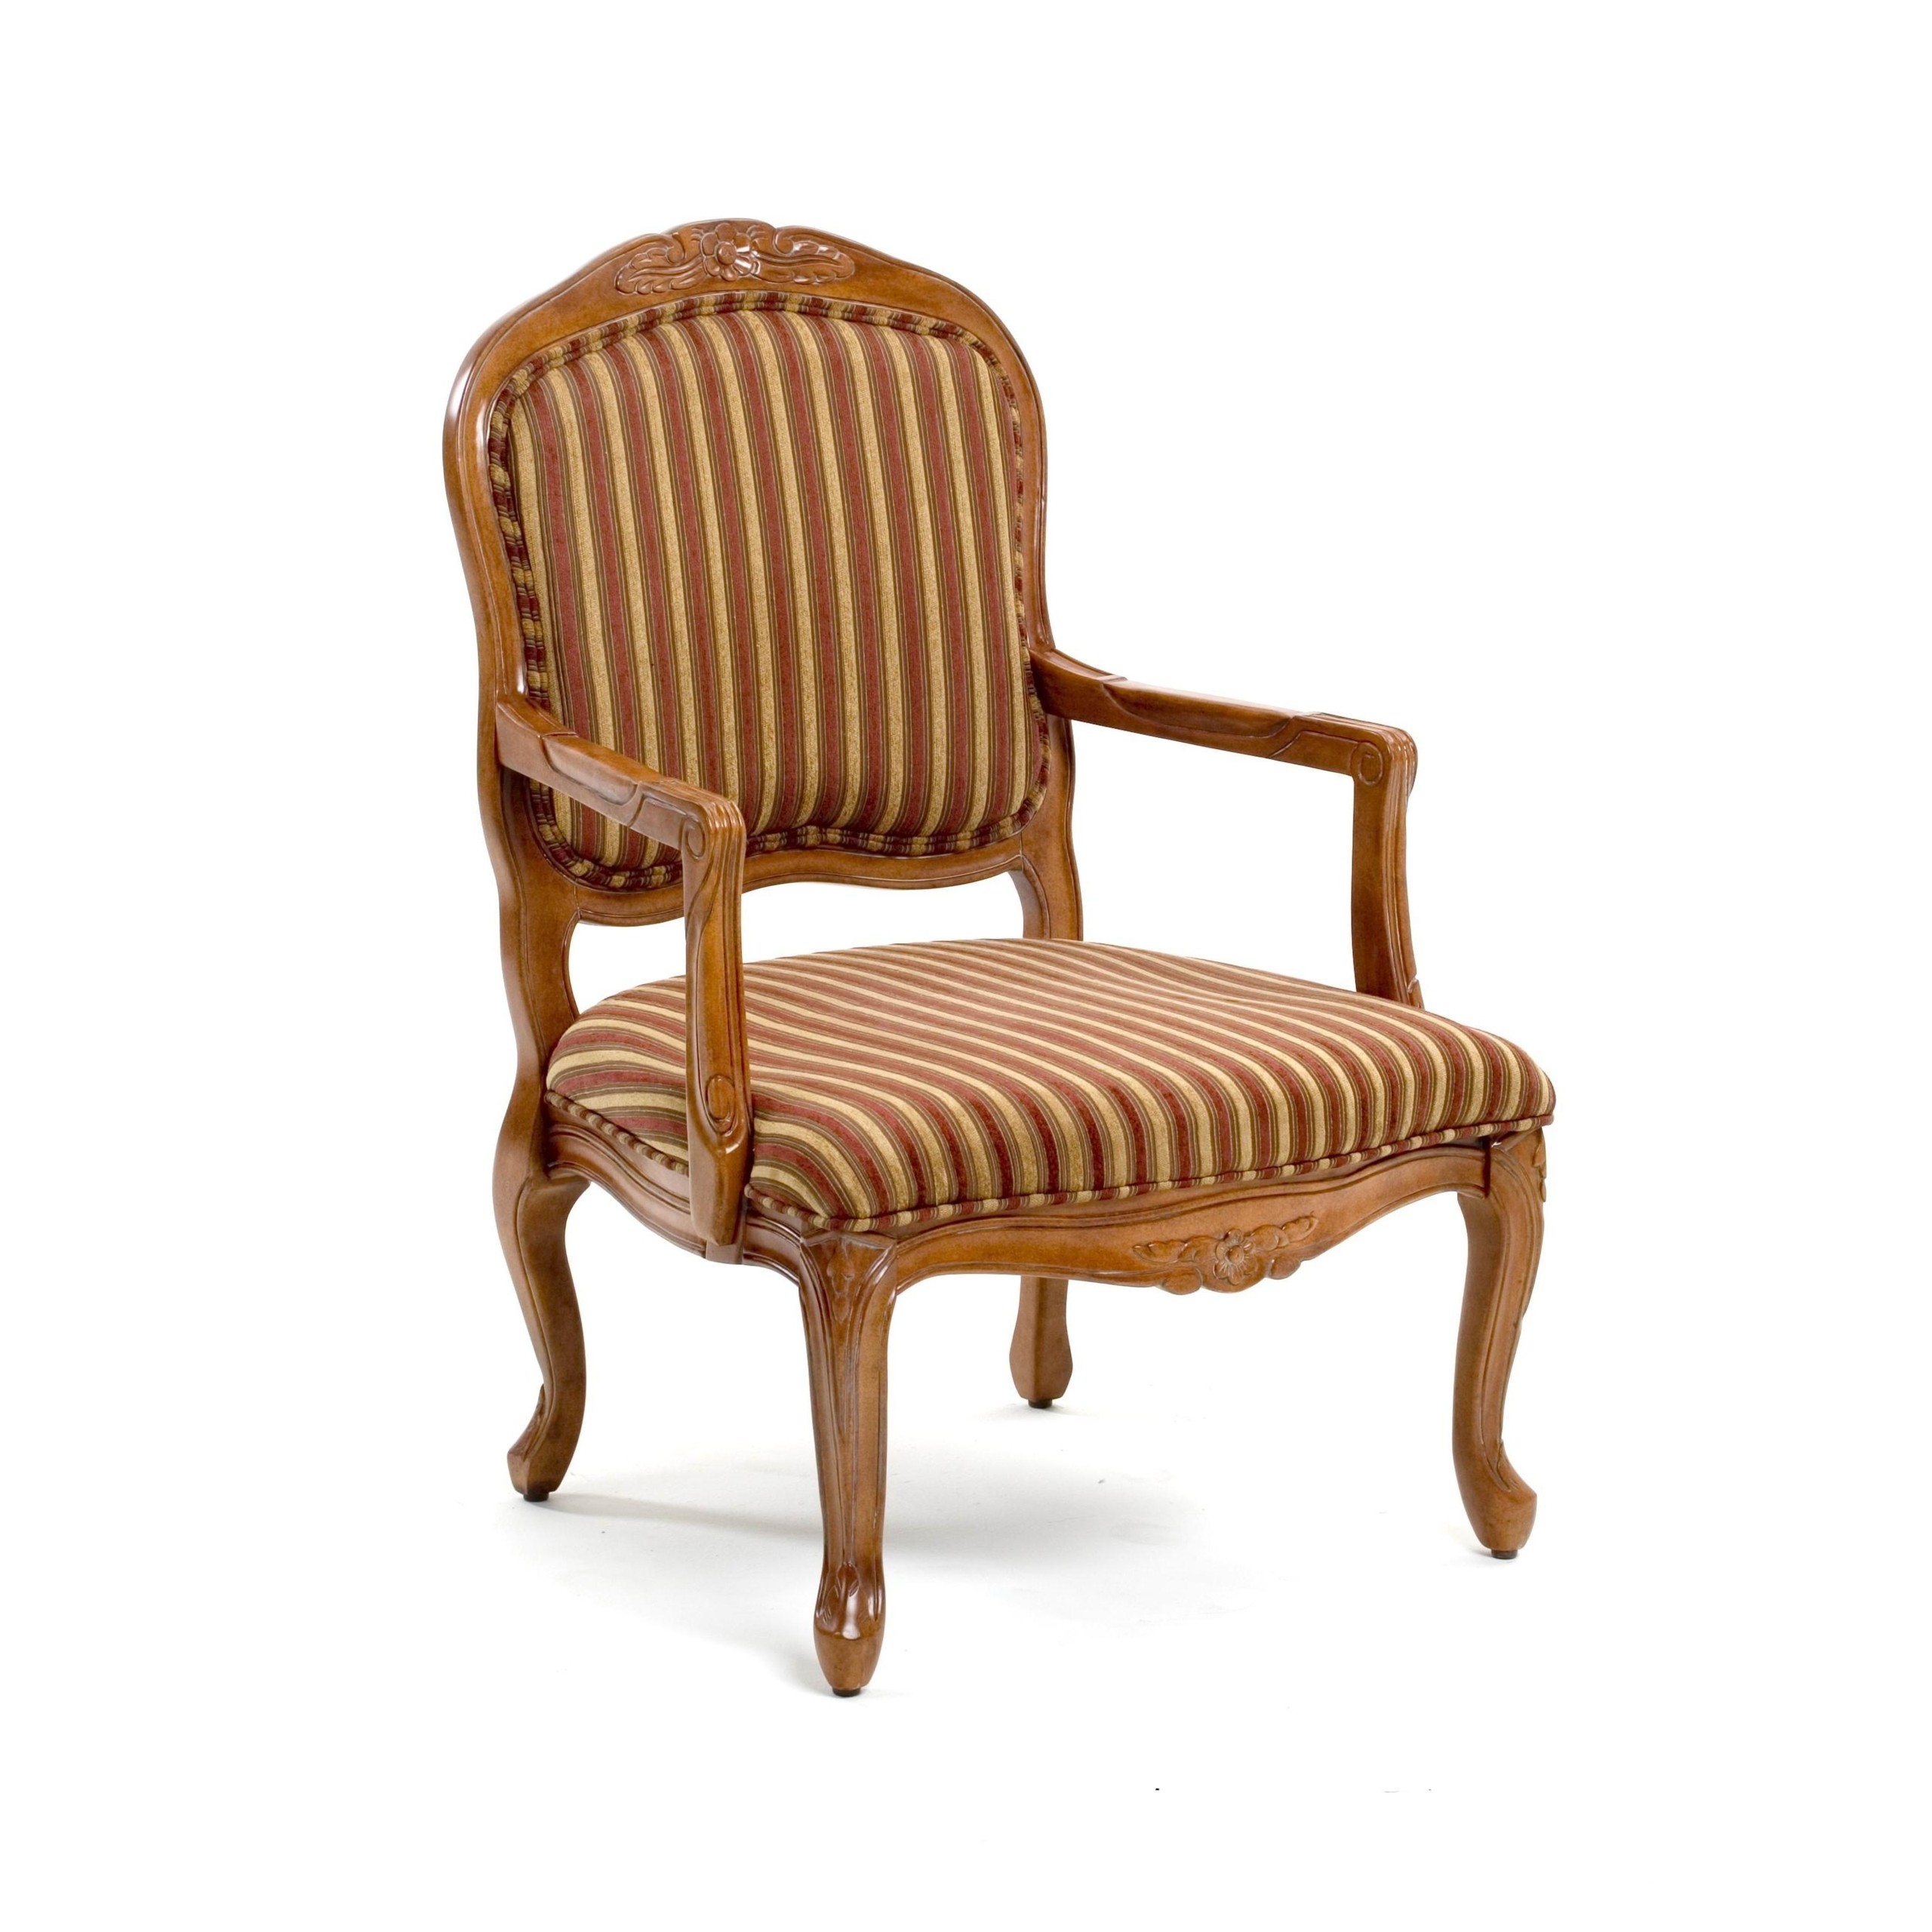 Wooden chairs with arms homesfeed 9